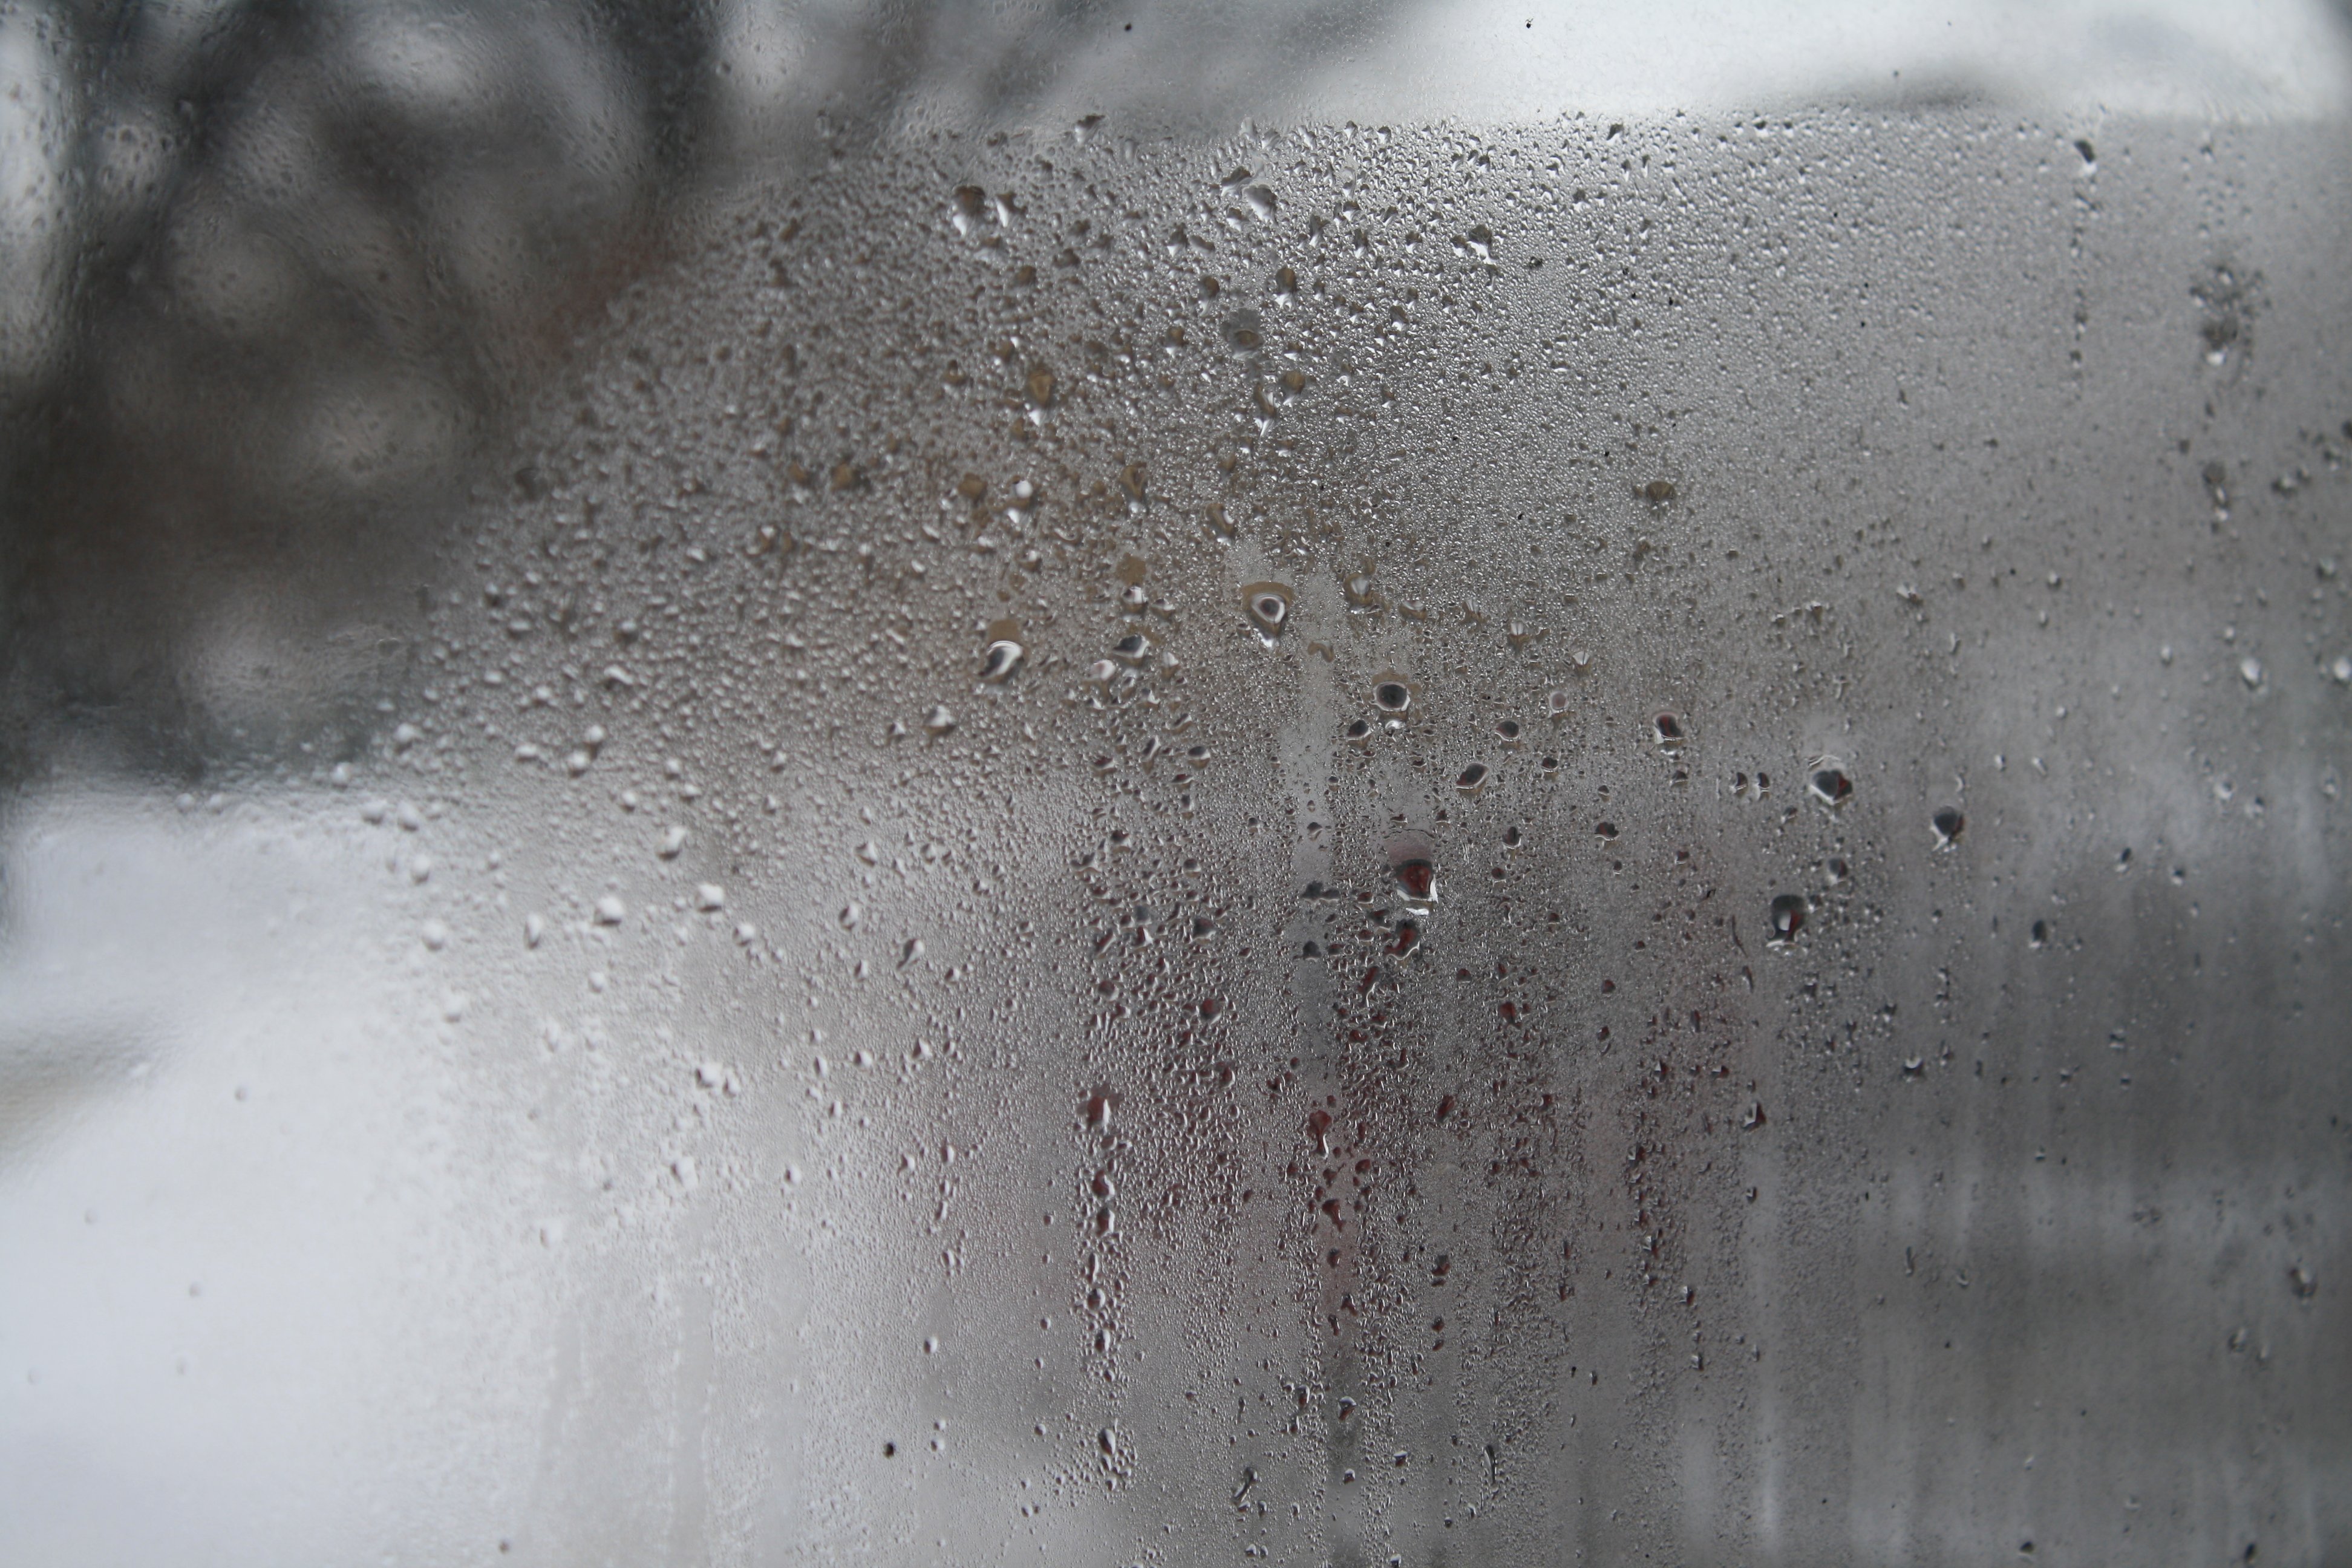 Condensation in windows can lead to problems, such as damage to the windows and surrounding walls, and mold.